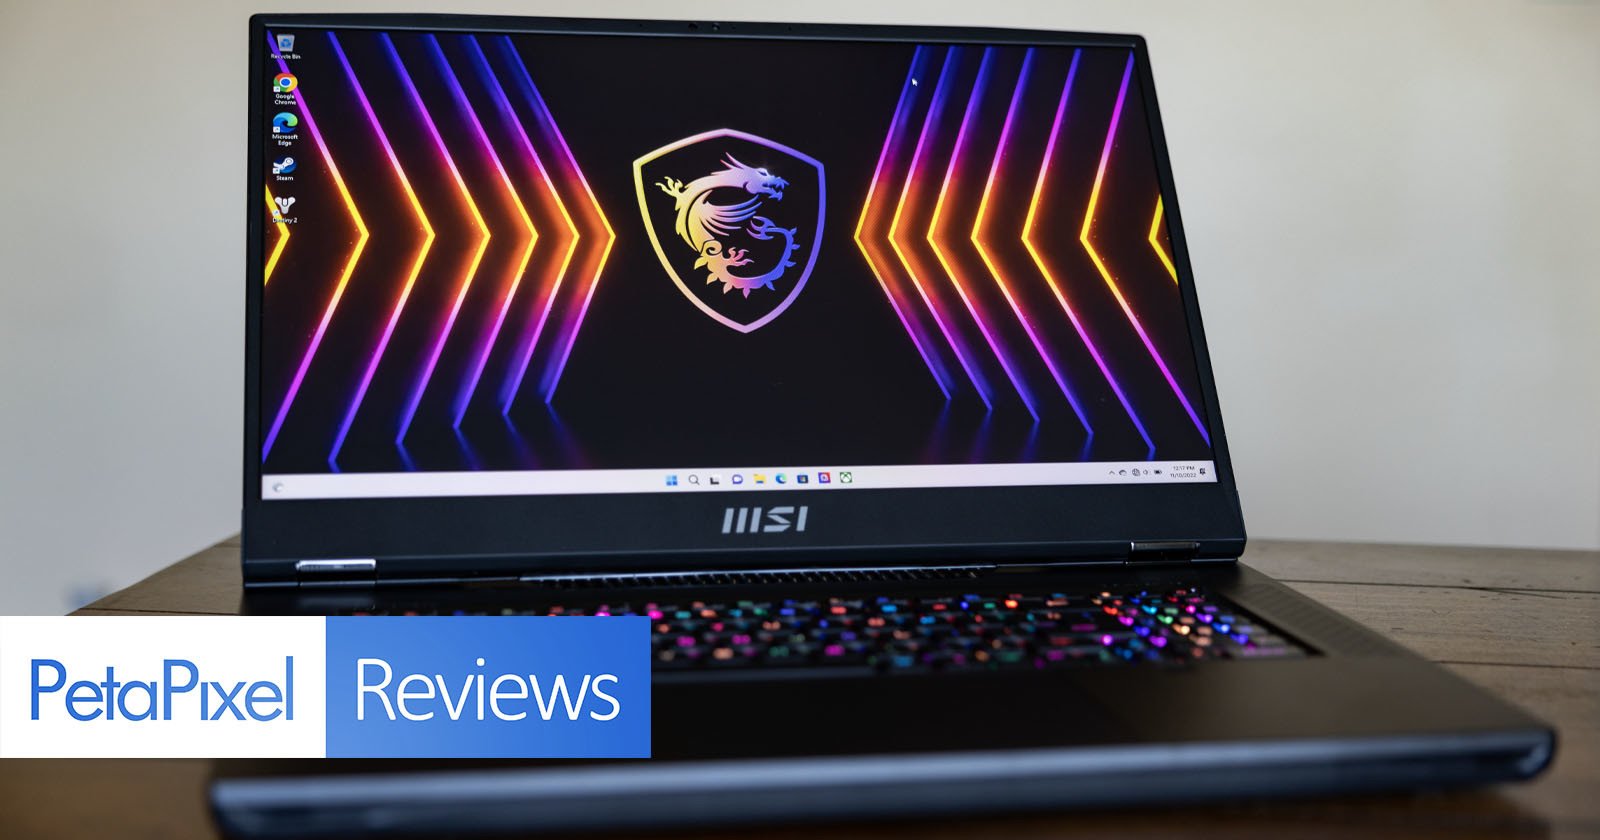 MSI Titan GT77 Review: Incredible Power at the Cost of Portability